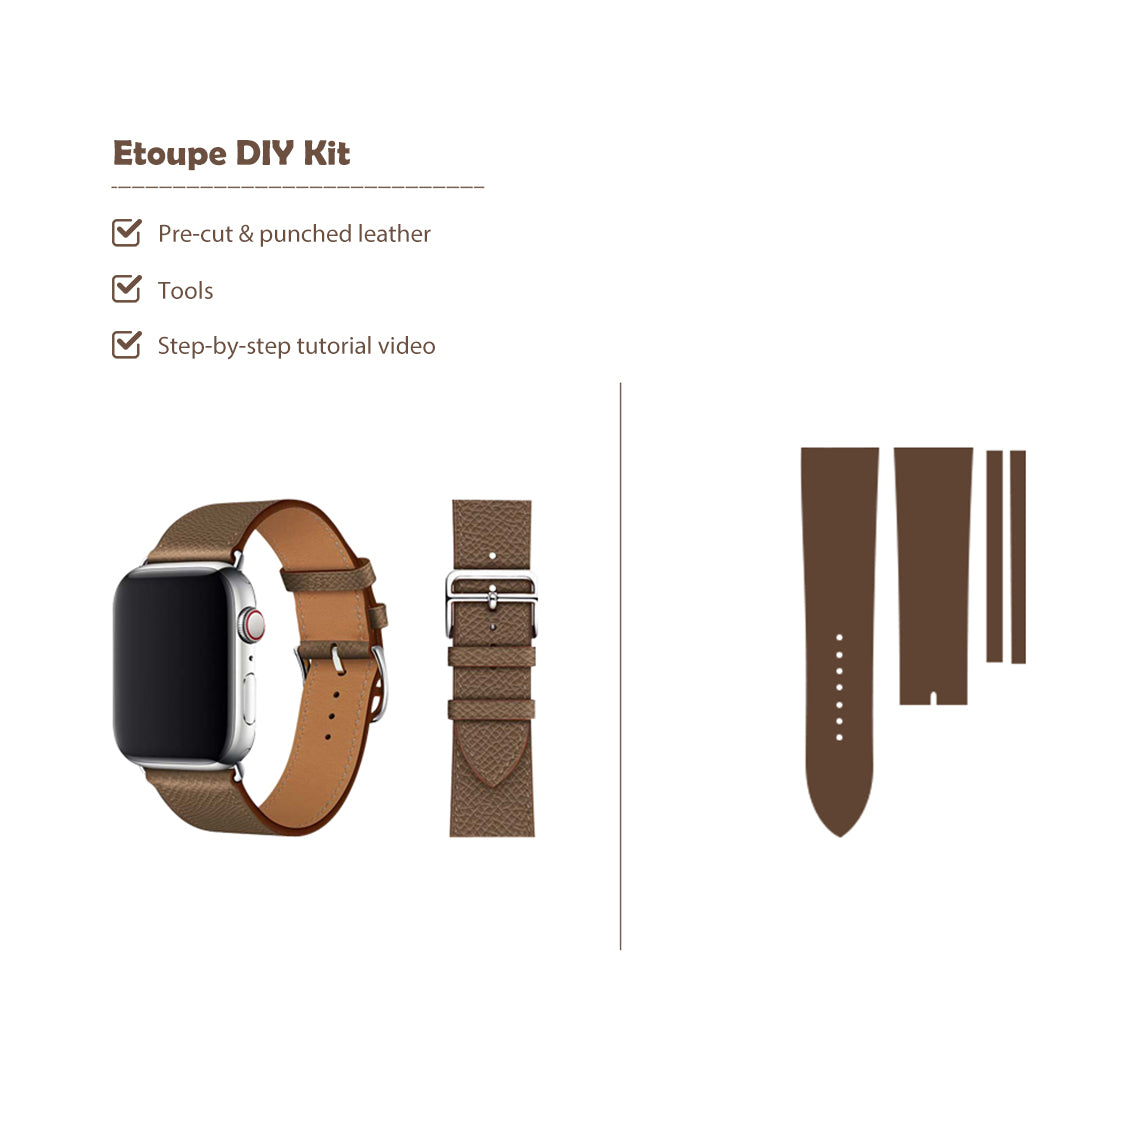 Etoupe Apple Watch Band Leather DIY Kit | POPSEWING®